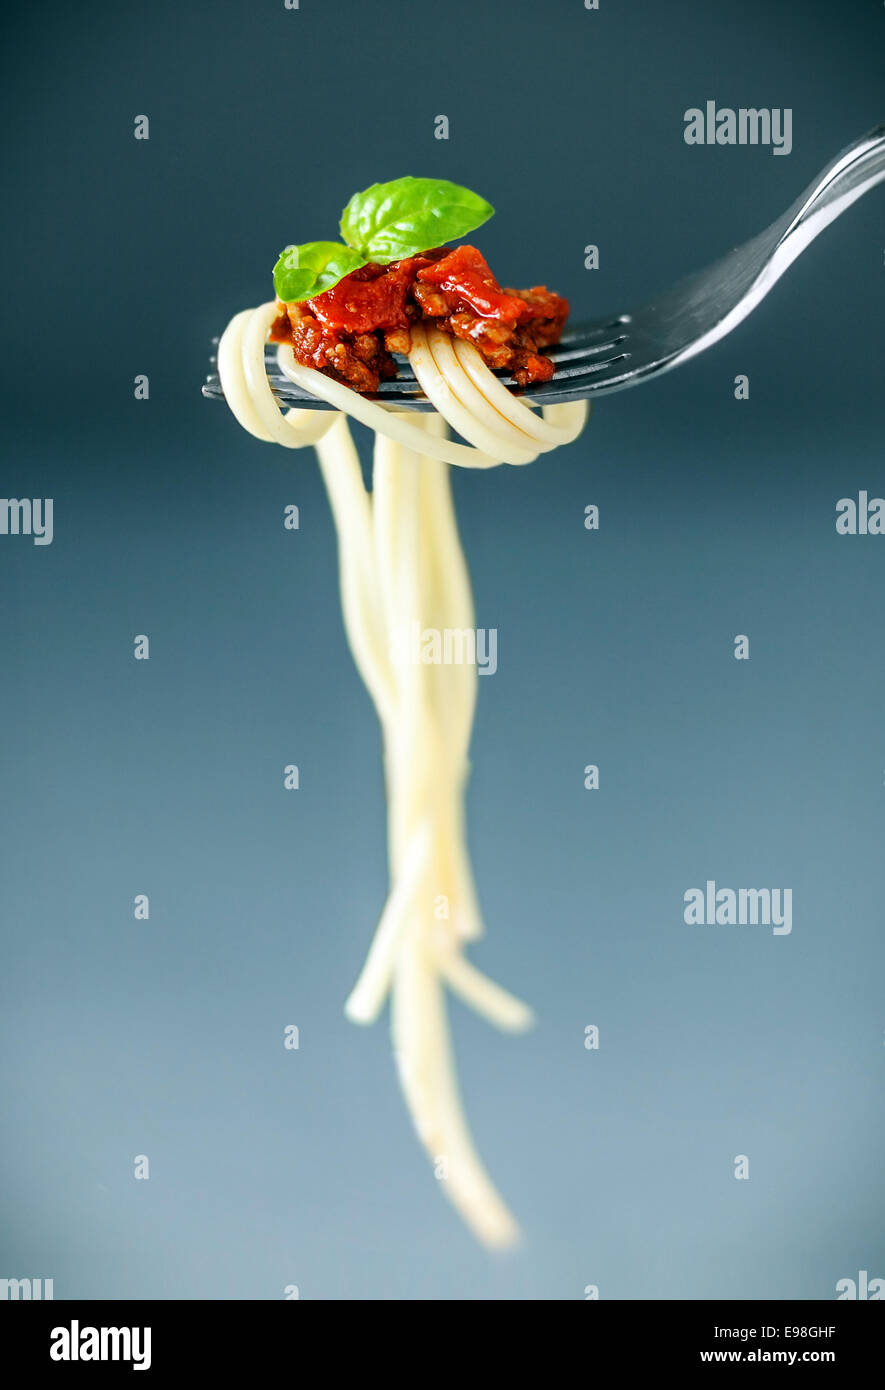 Italian spaghetti twirled around on a fork with meaty bolognaise sauce and fresh basil leaves against a graduated grey background with copyspace Stock Photo